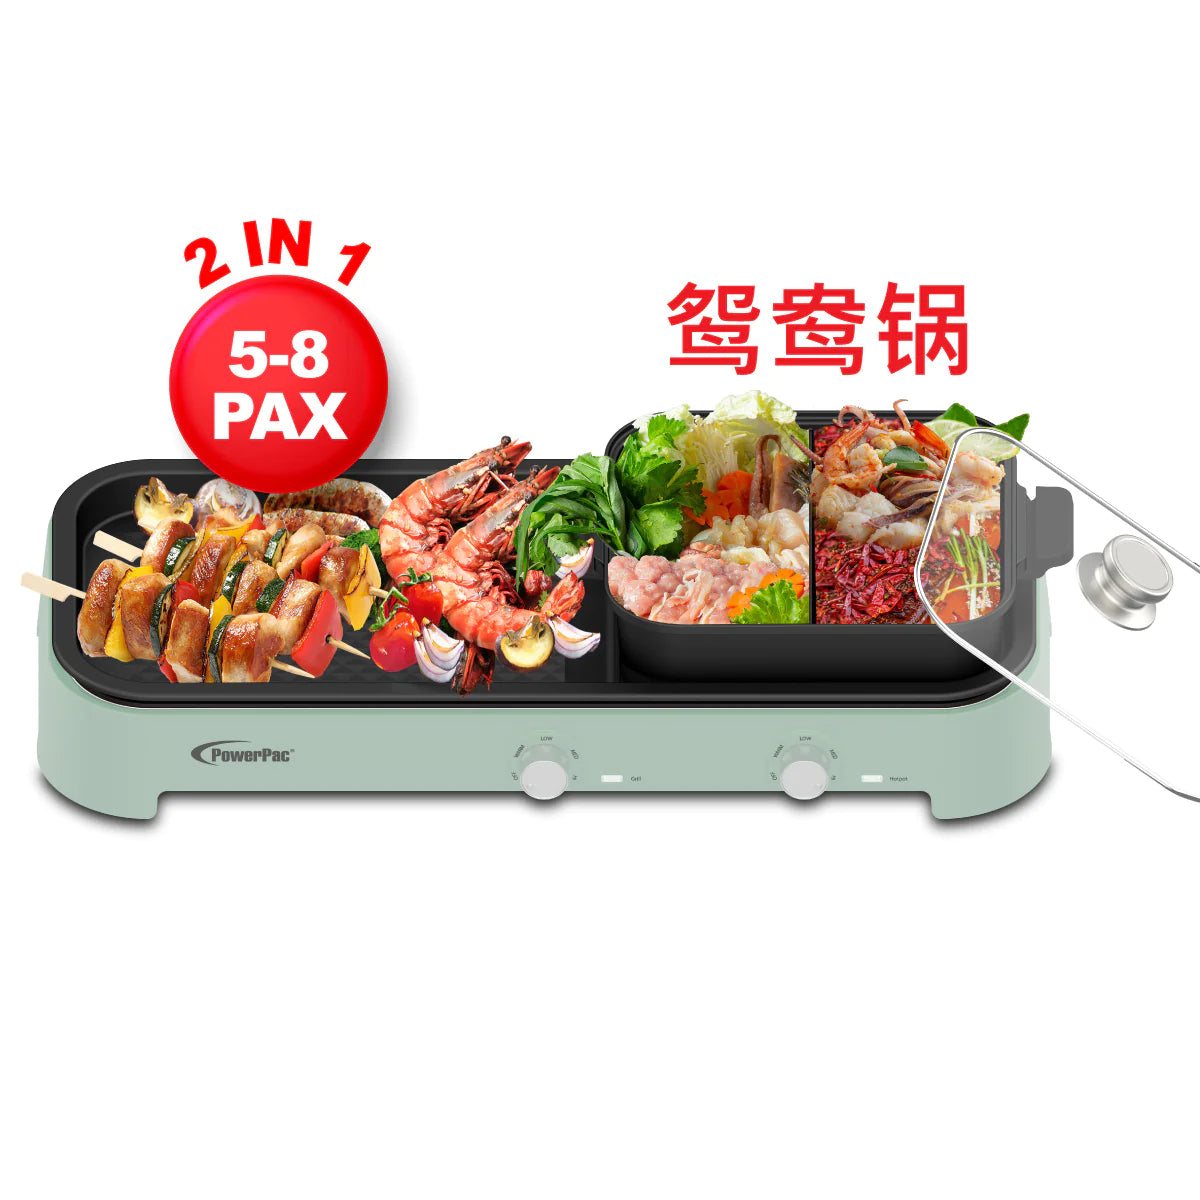 PowerPac 2in1 Steamboat with YuanYang Pot